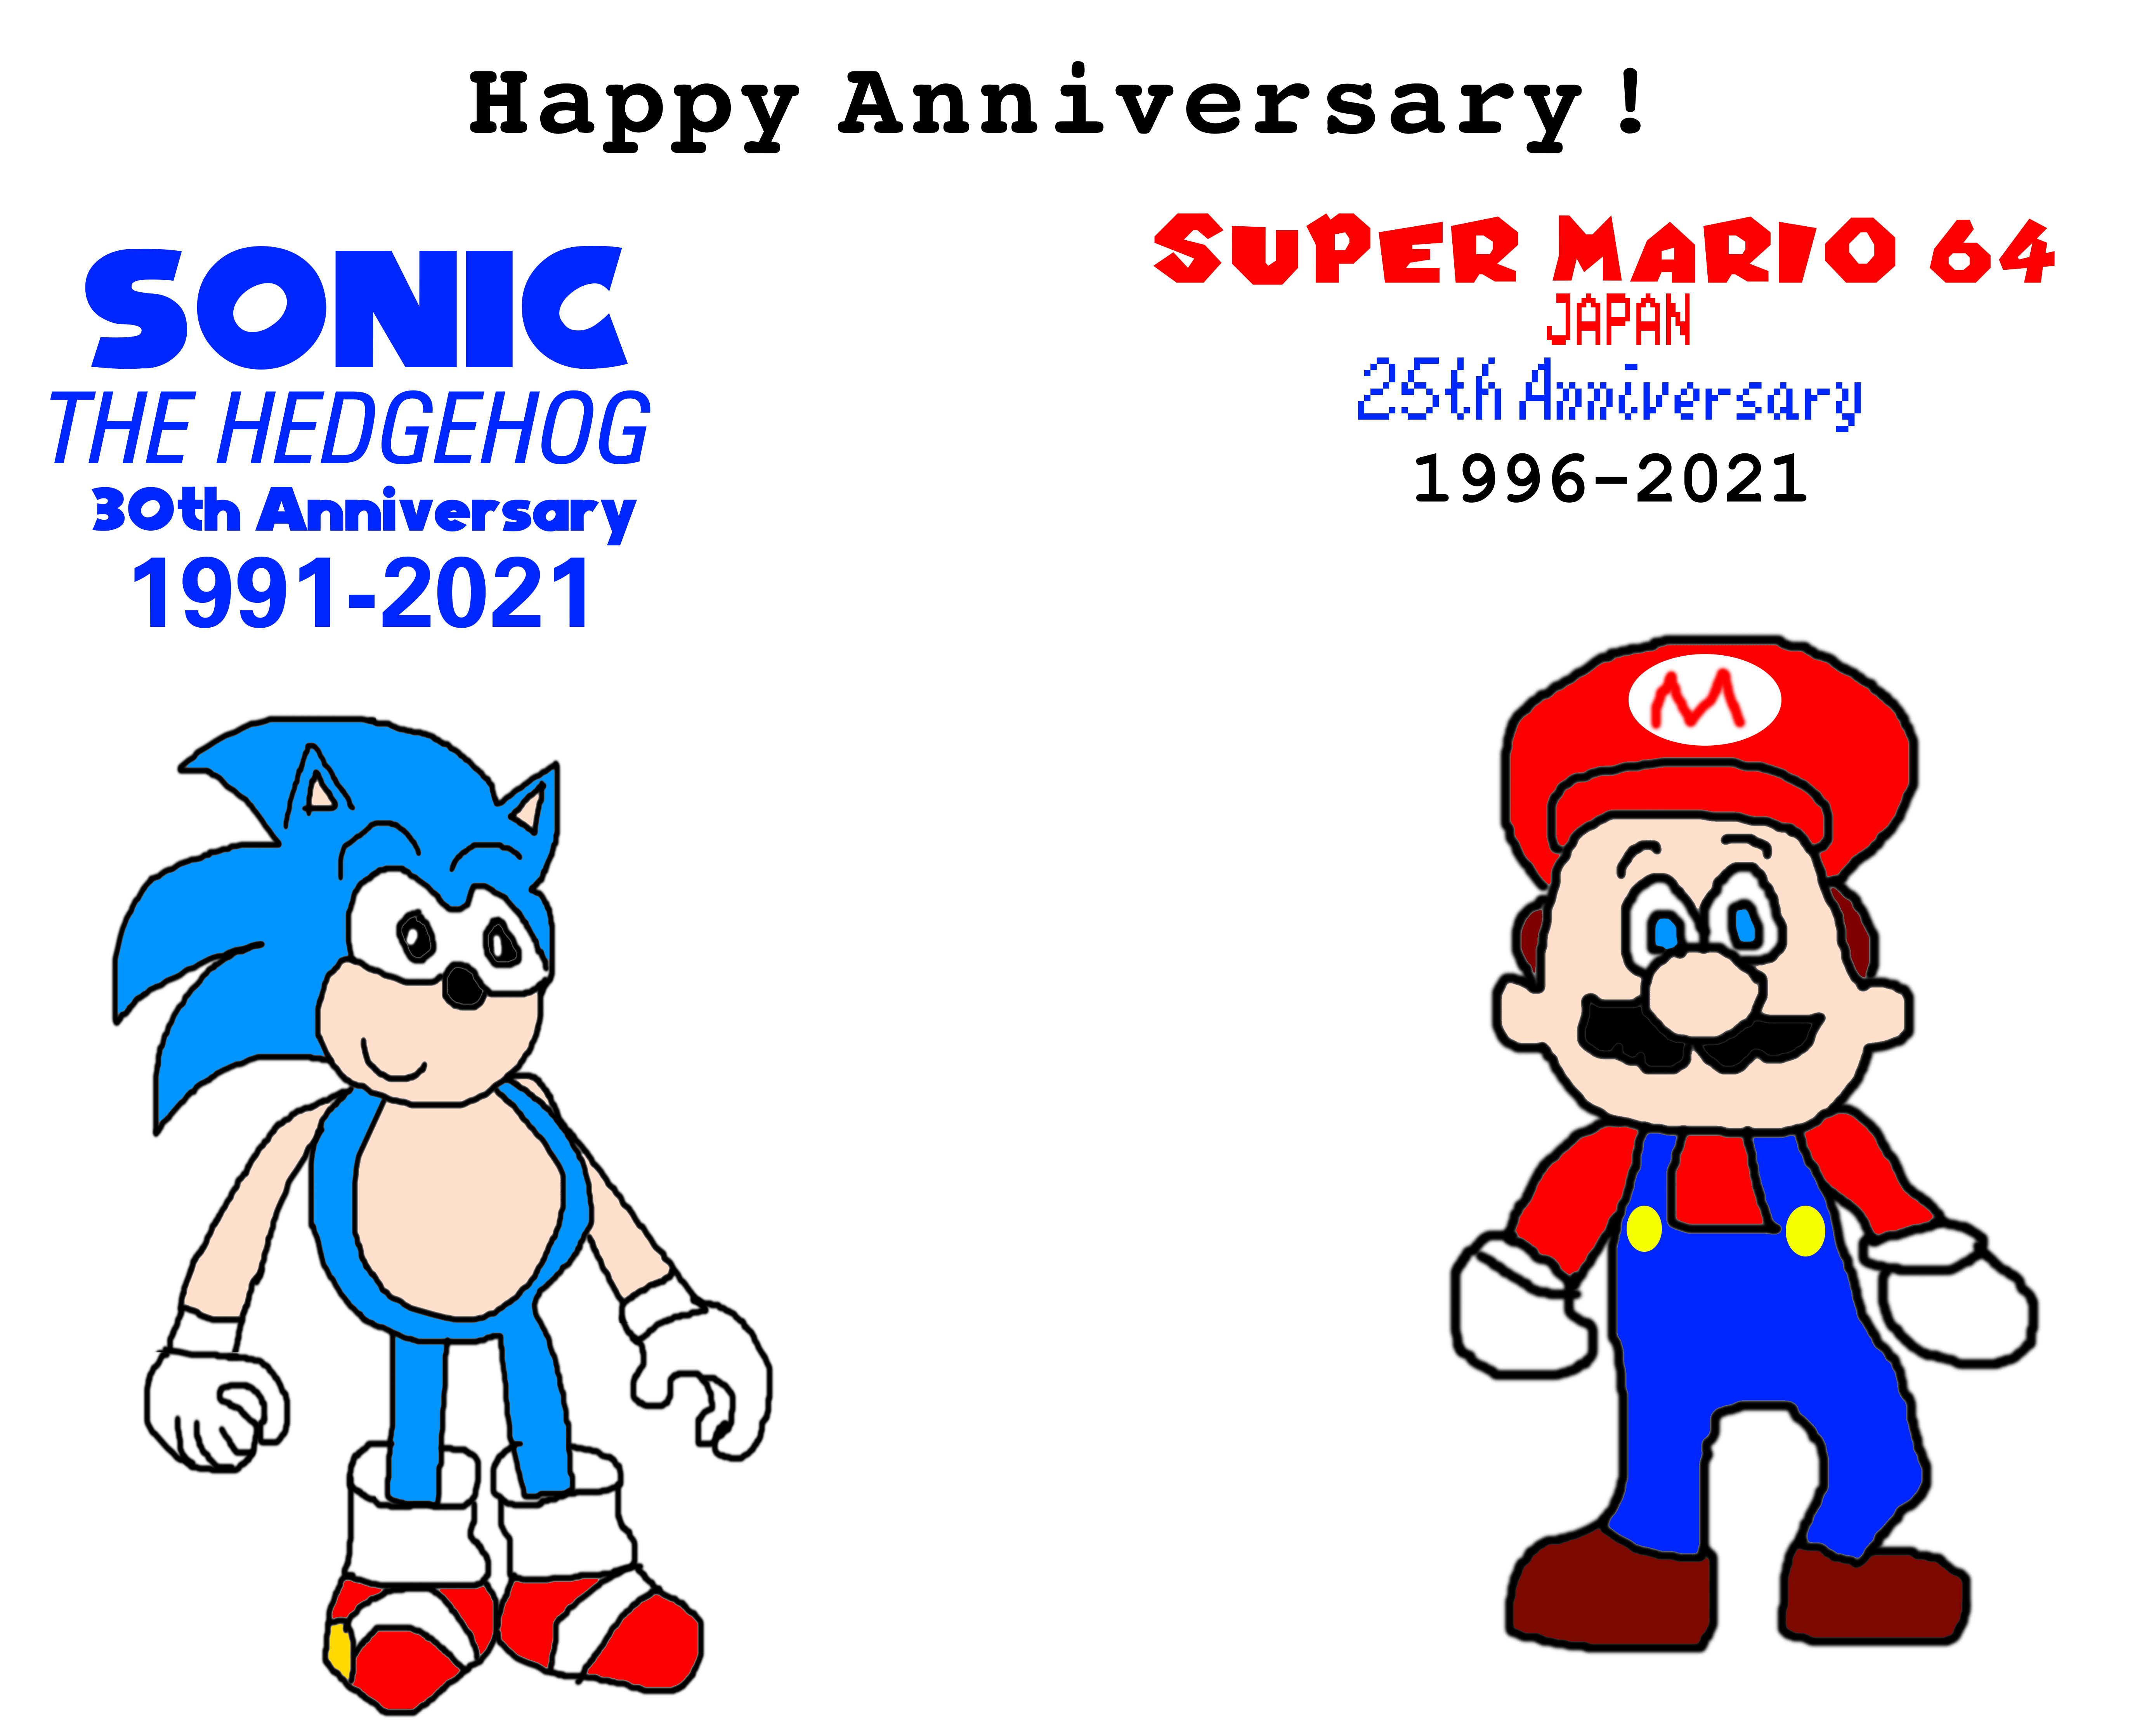 The Hedgehog's 30th Anniversary Super Mario 64's 25th Anniversary! : Free Download, Borrow, and Streaming Internet Archive